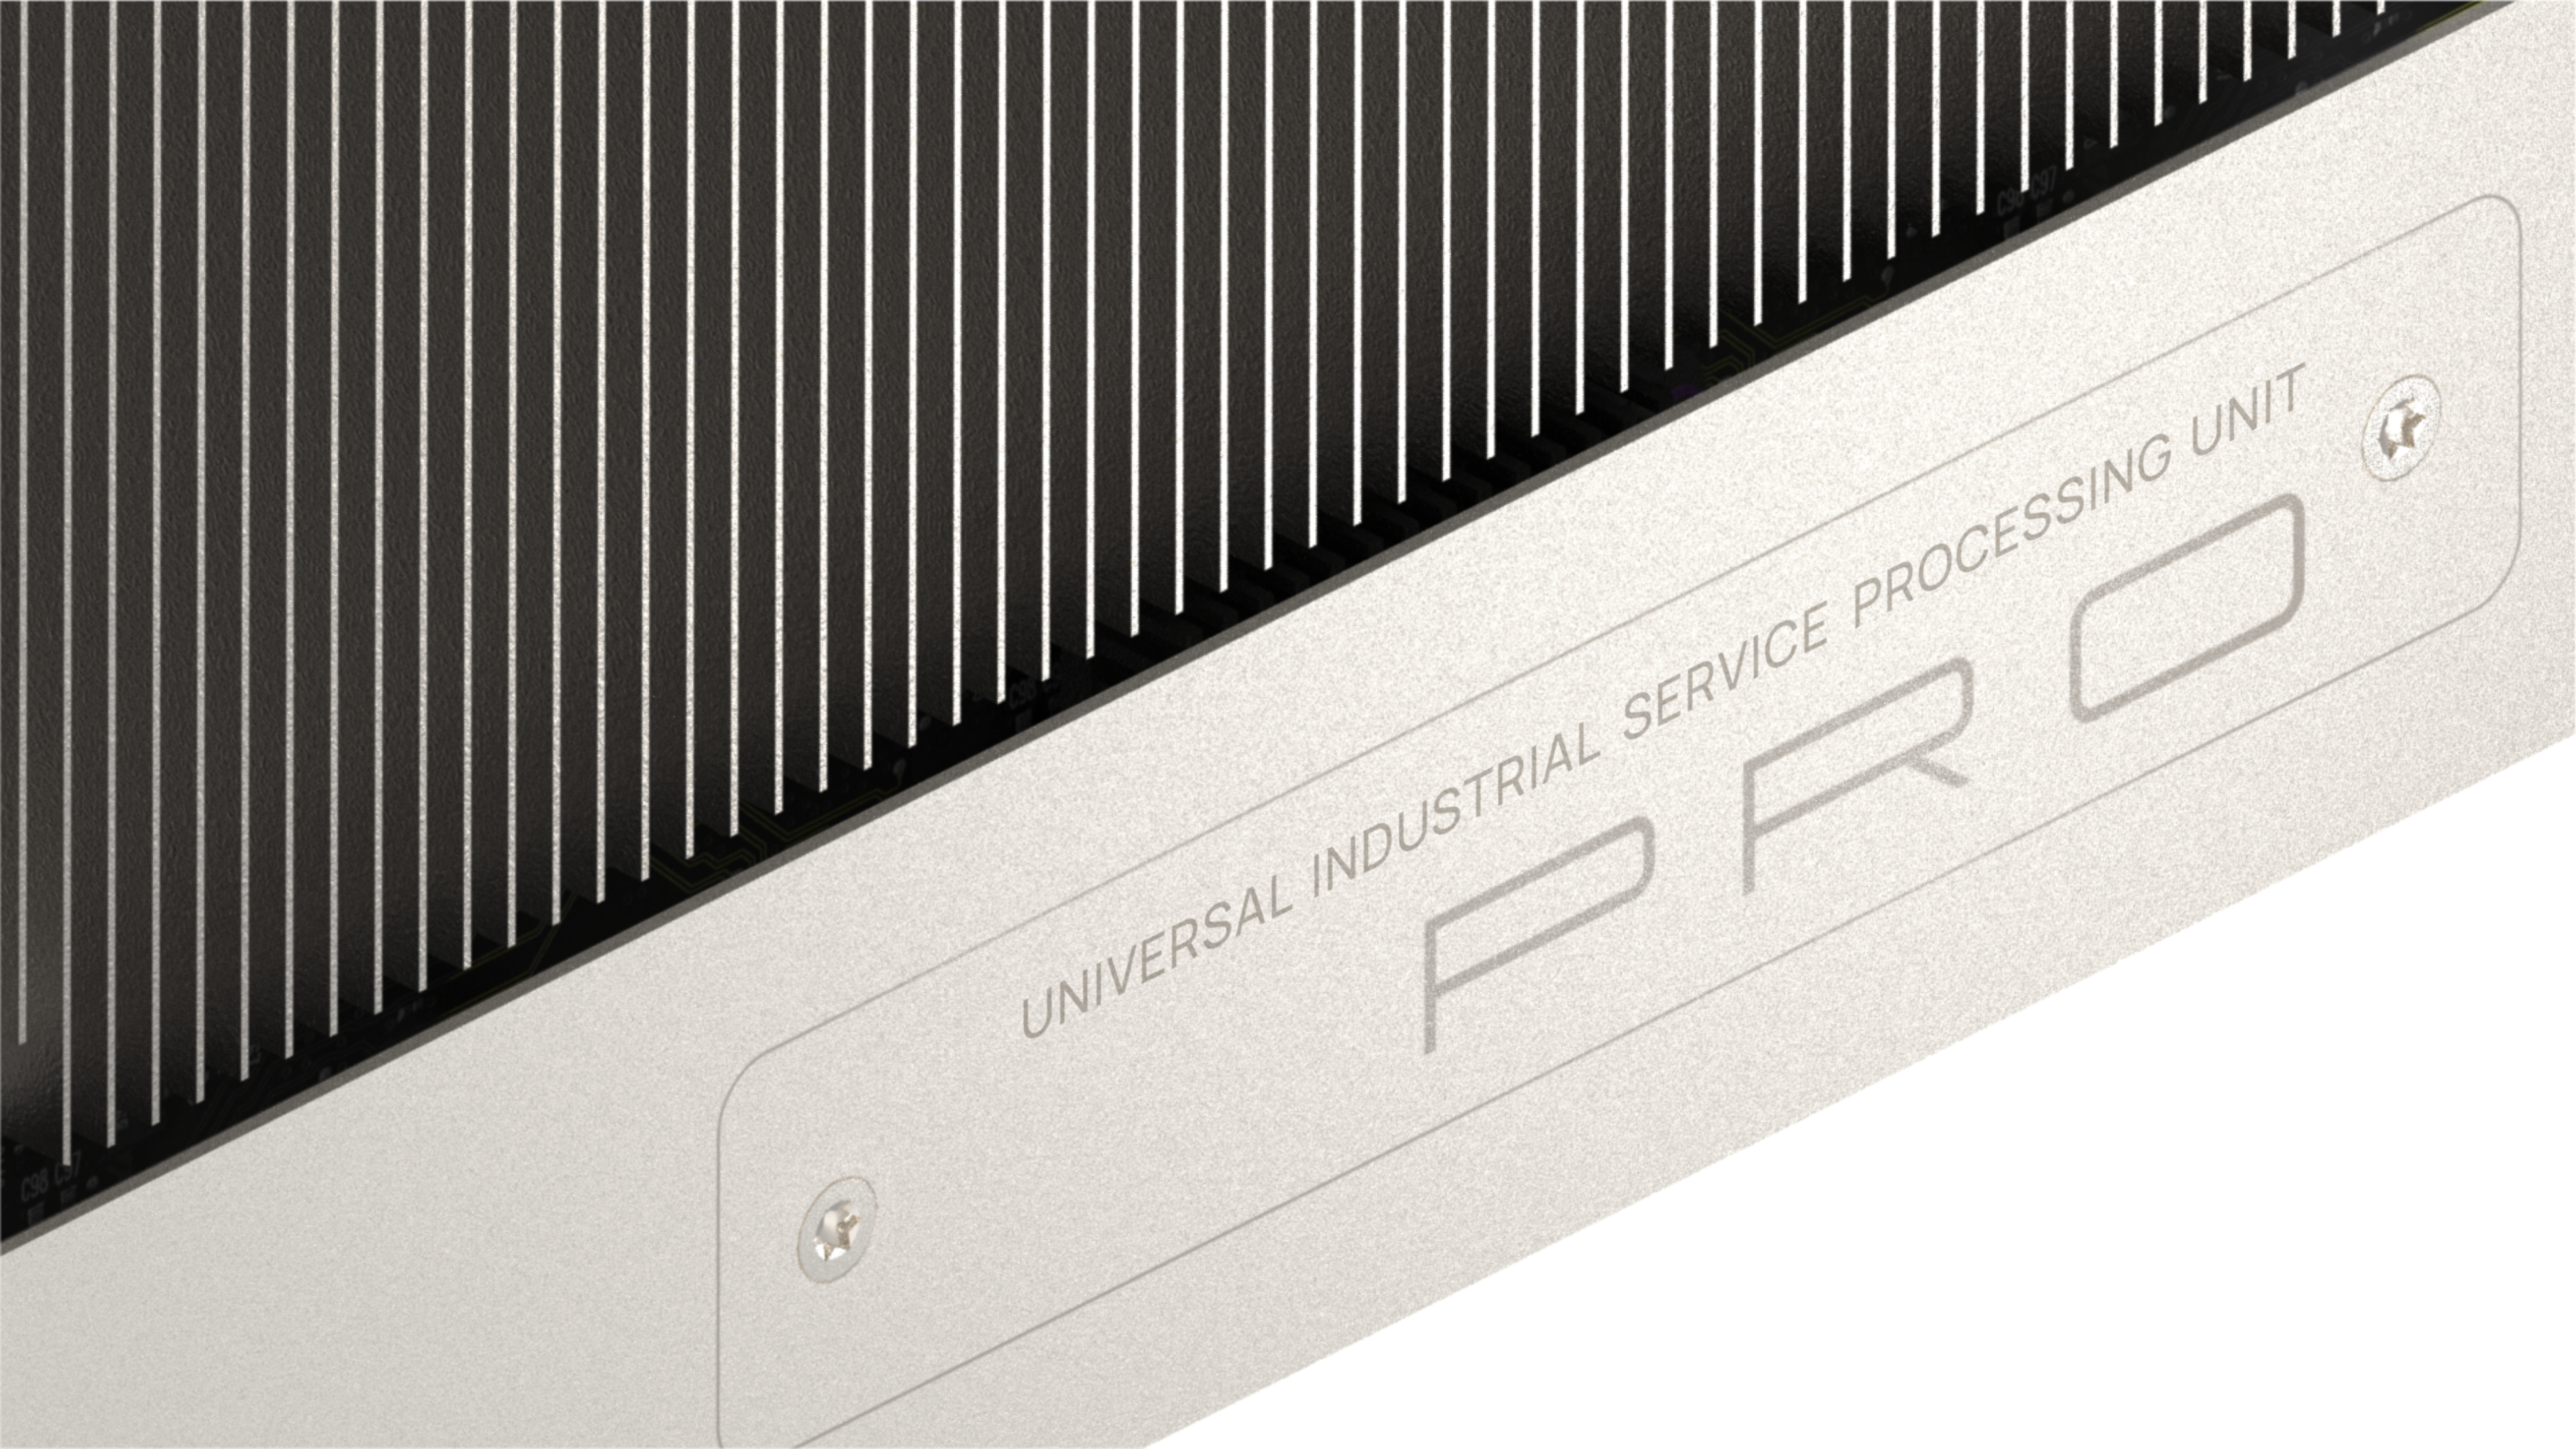 Universal Industrial Service Processing Unit